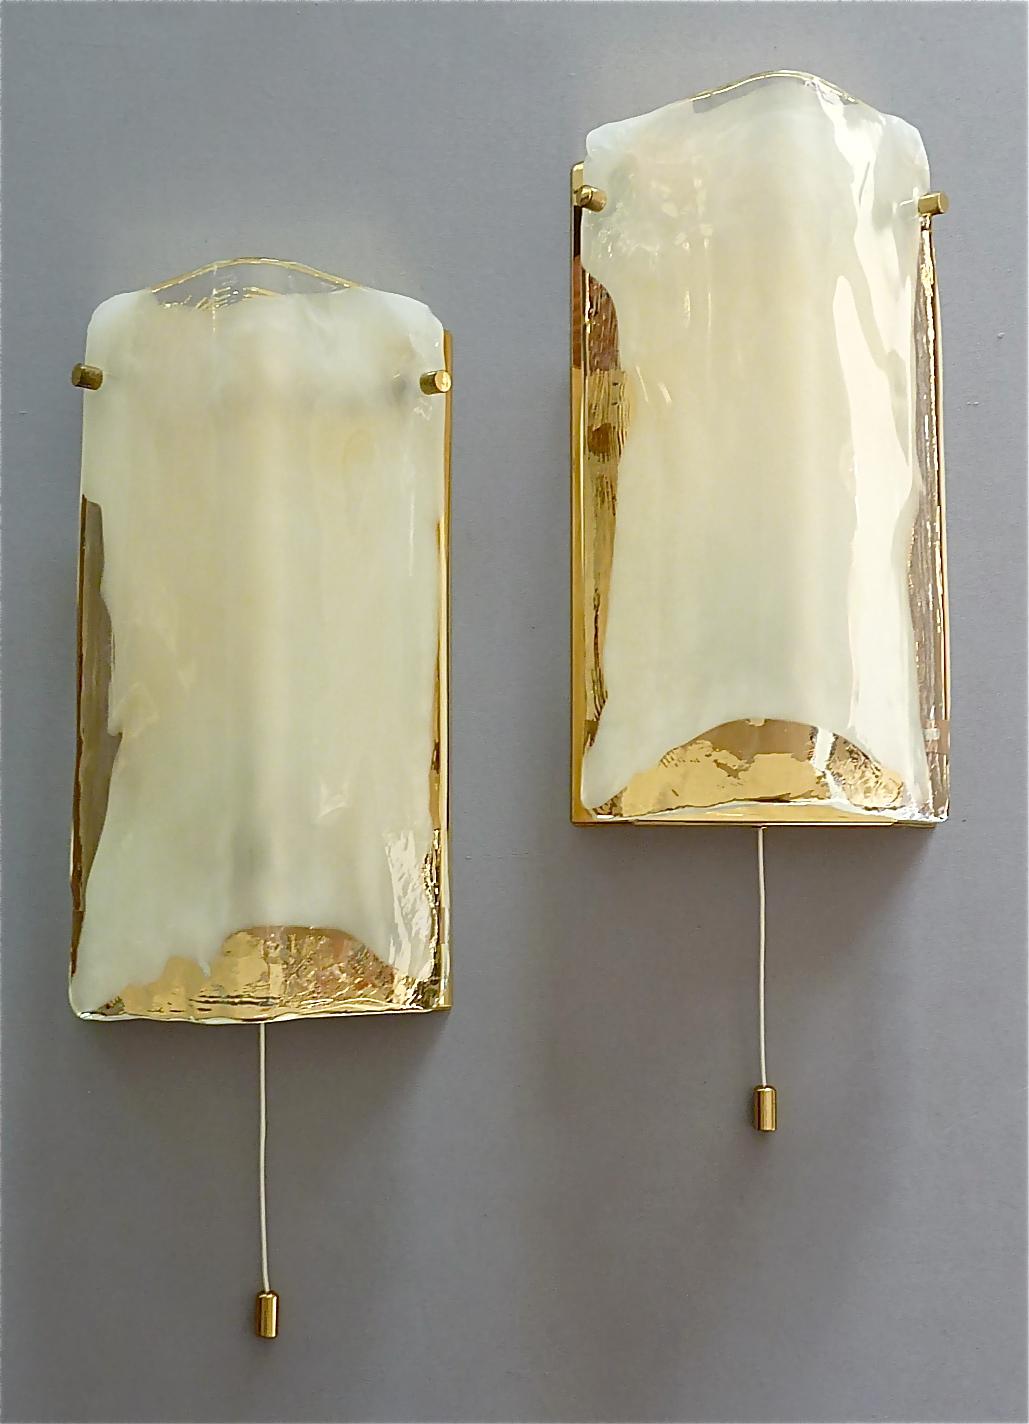 A beautiful pair of wall lights or sconces by J.T. Kalmar, Austria, circa 1960-1970, made of brass and crystal glass. The modern and stylish model is typical for Kalmar, highest quality comparable with Venini, Mazzega and Kaiser, and best materials.